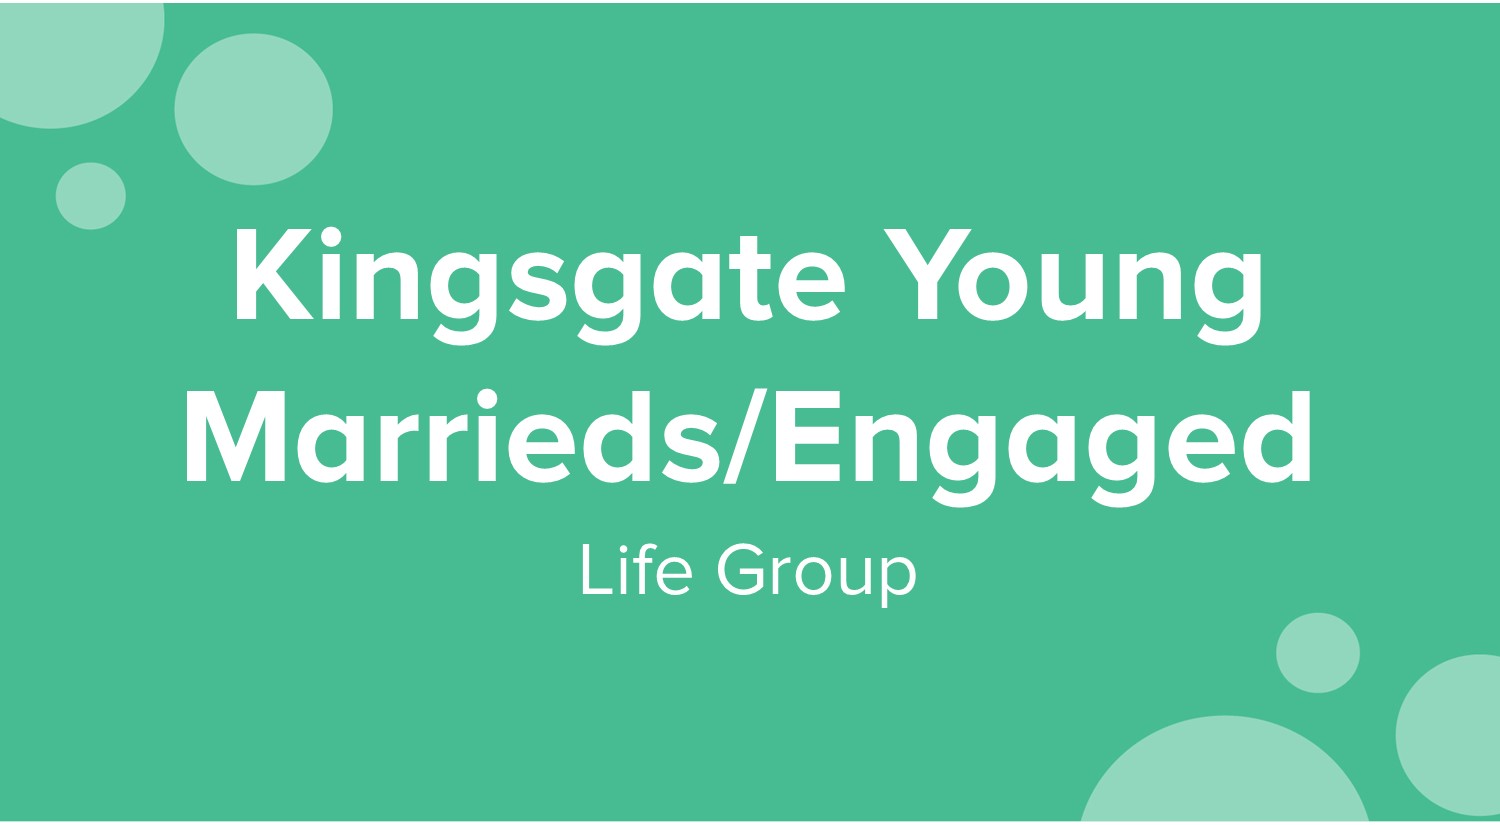 Kingsgate Young Marrieds/Engaged Life Group